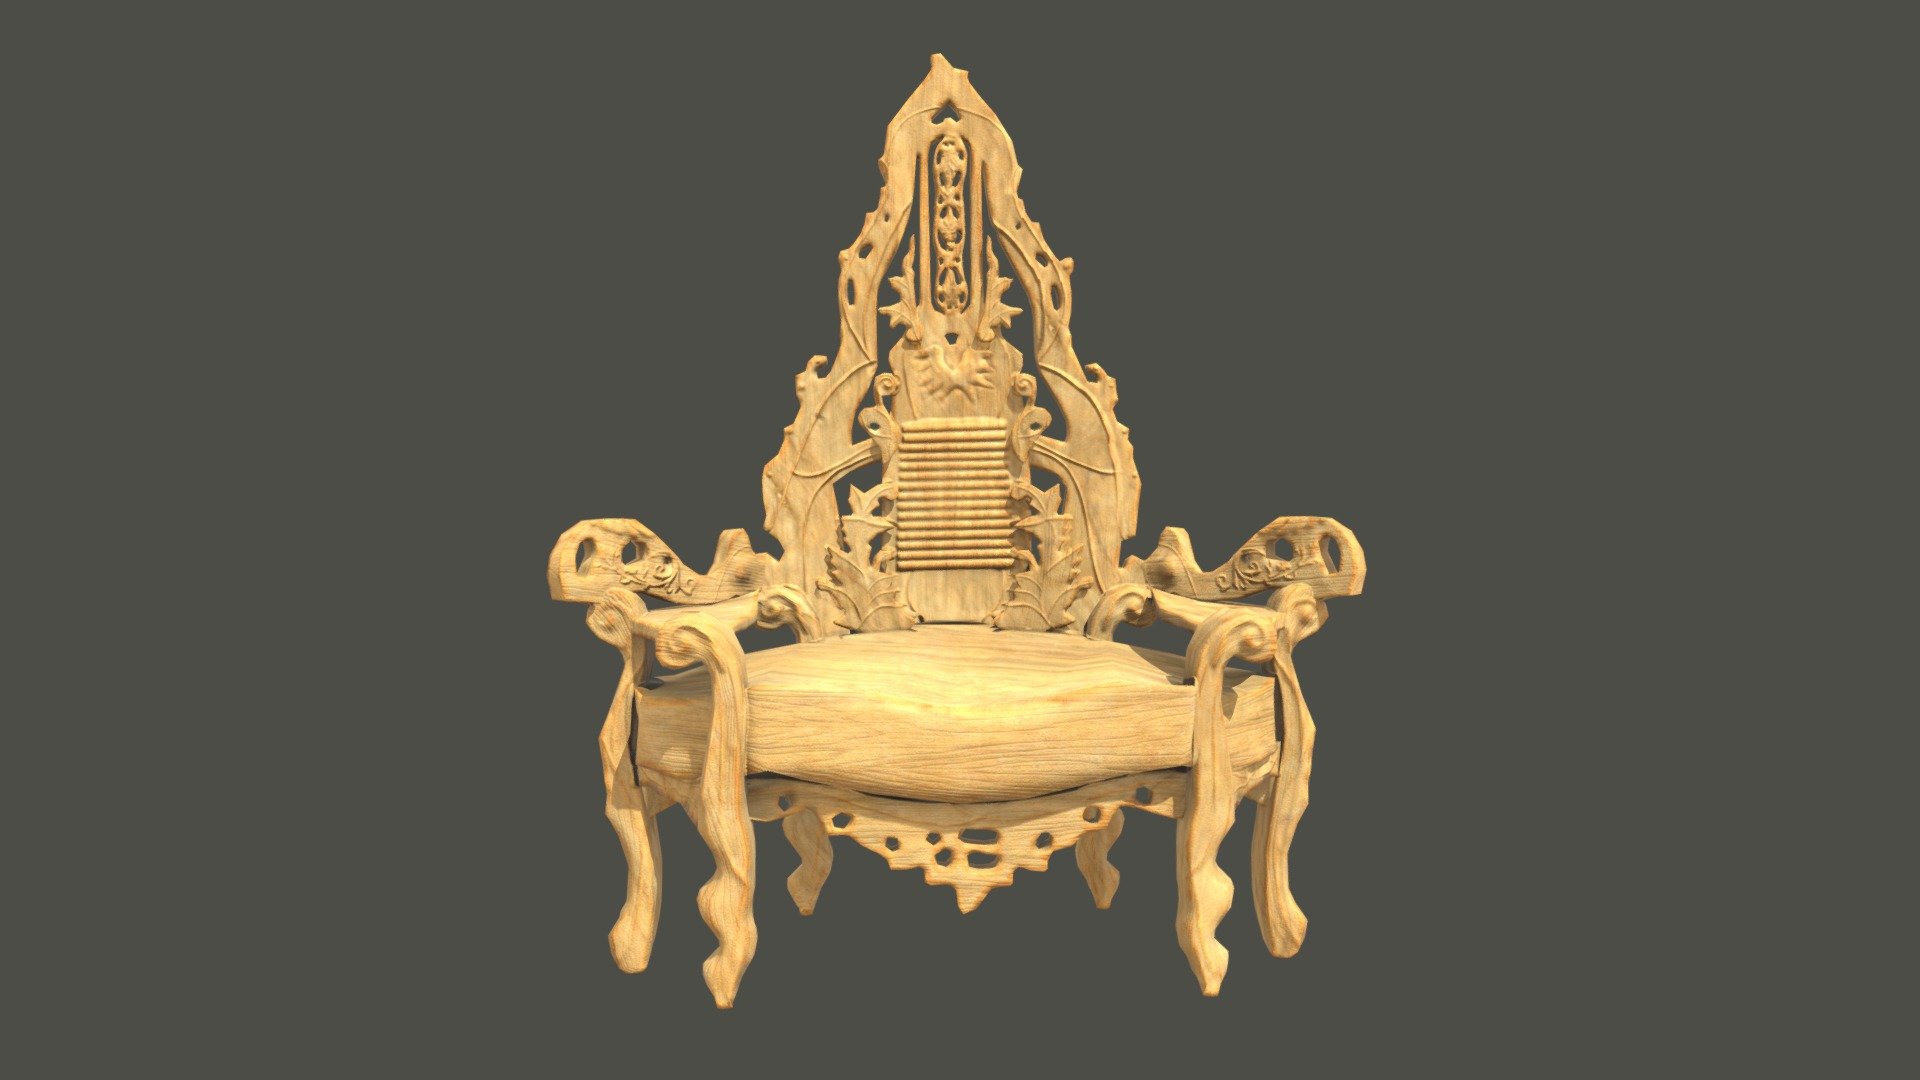 This asset was used in a medieval castle 3d model